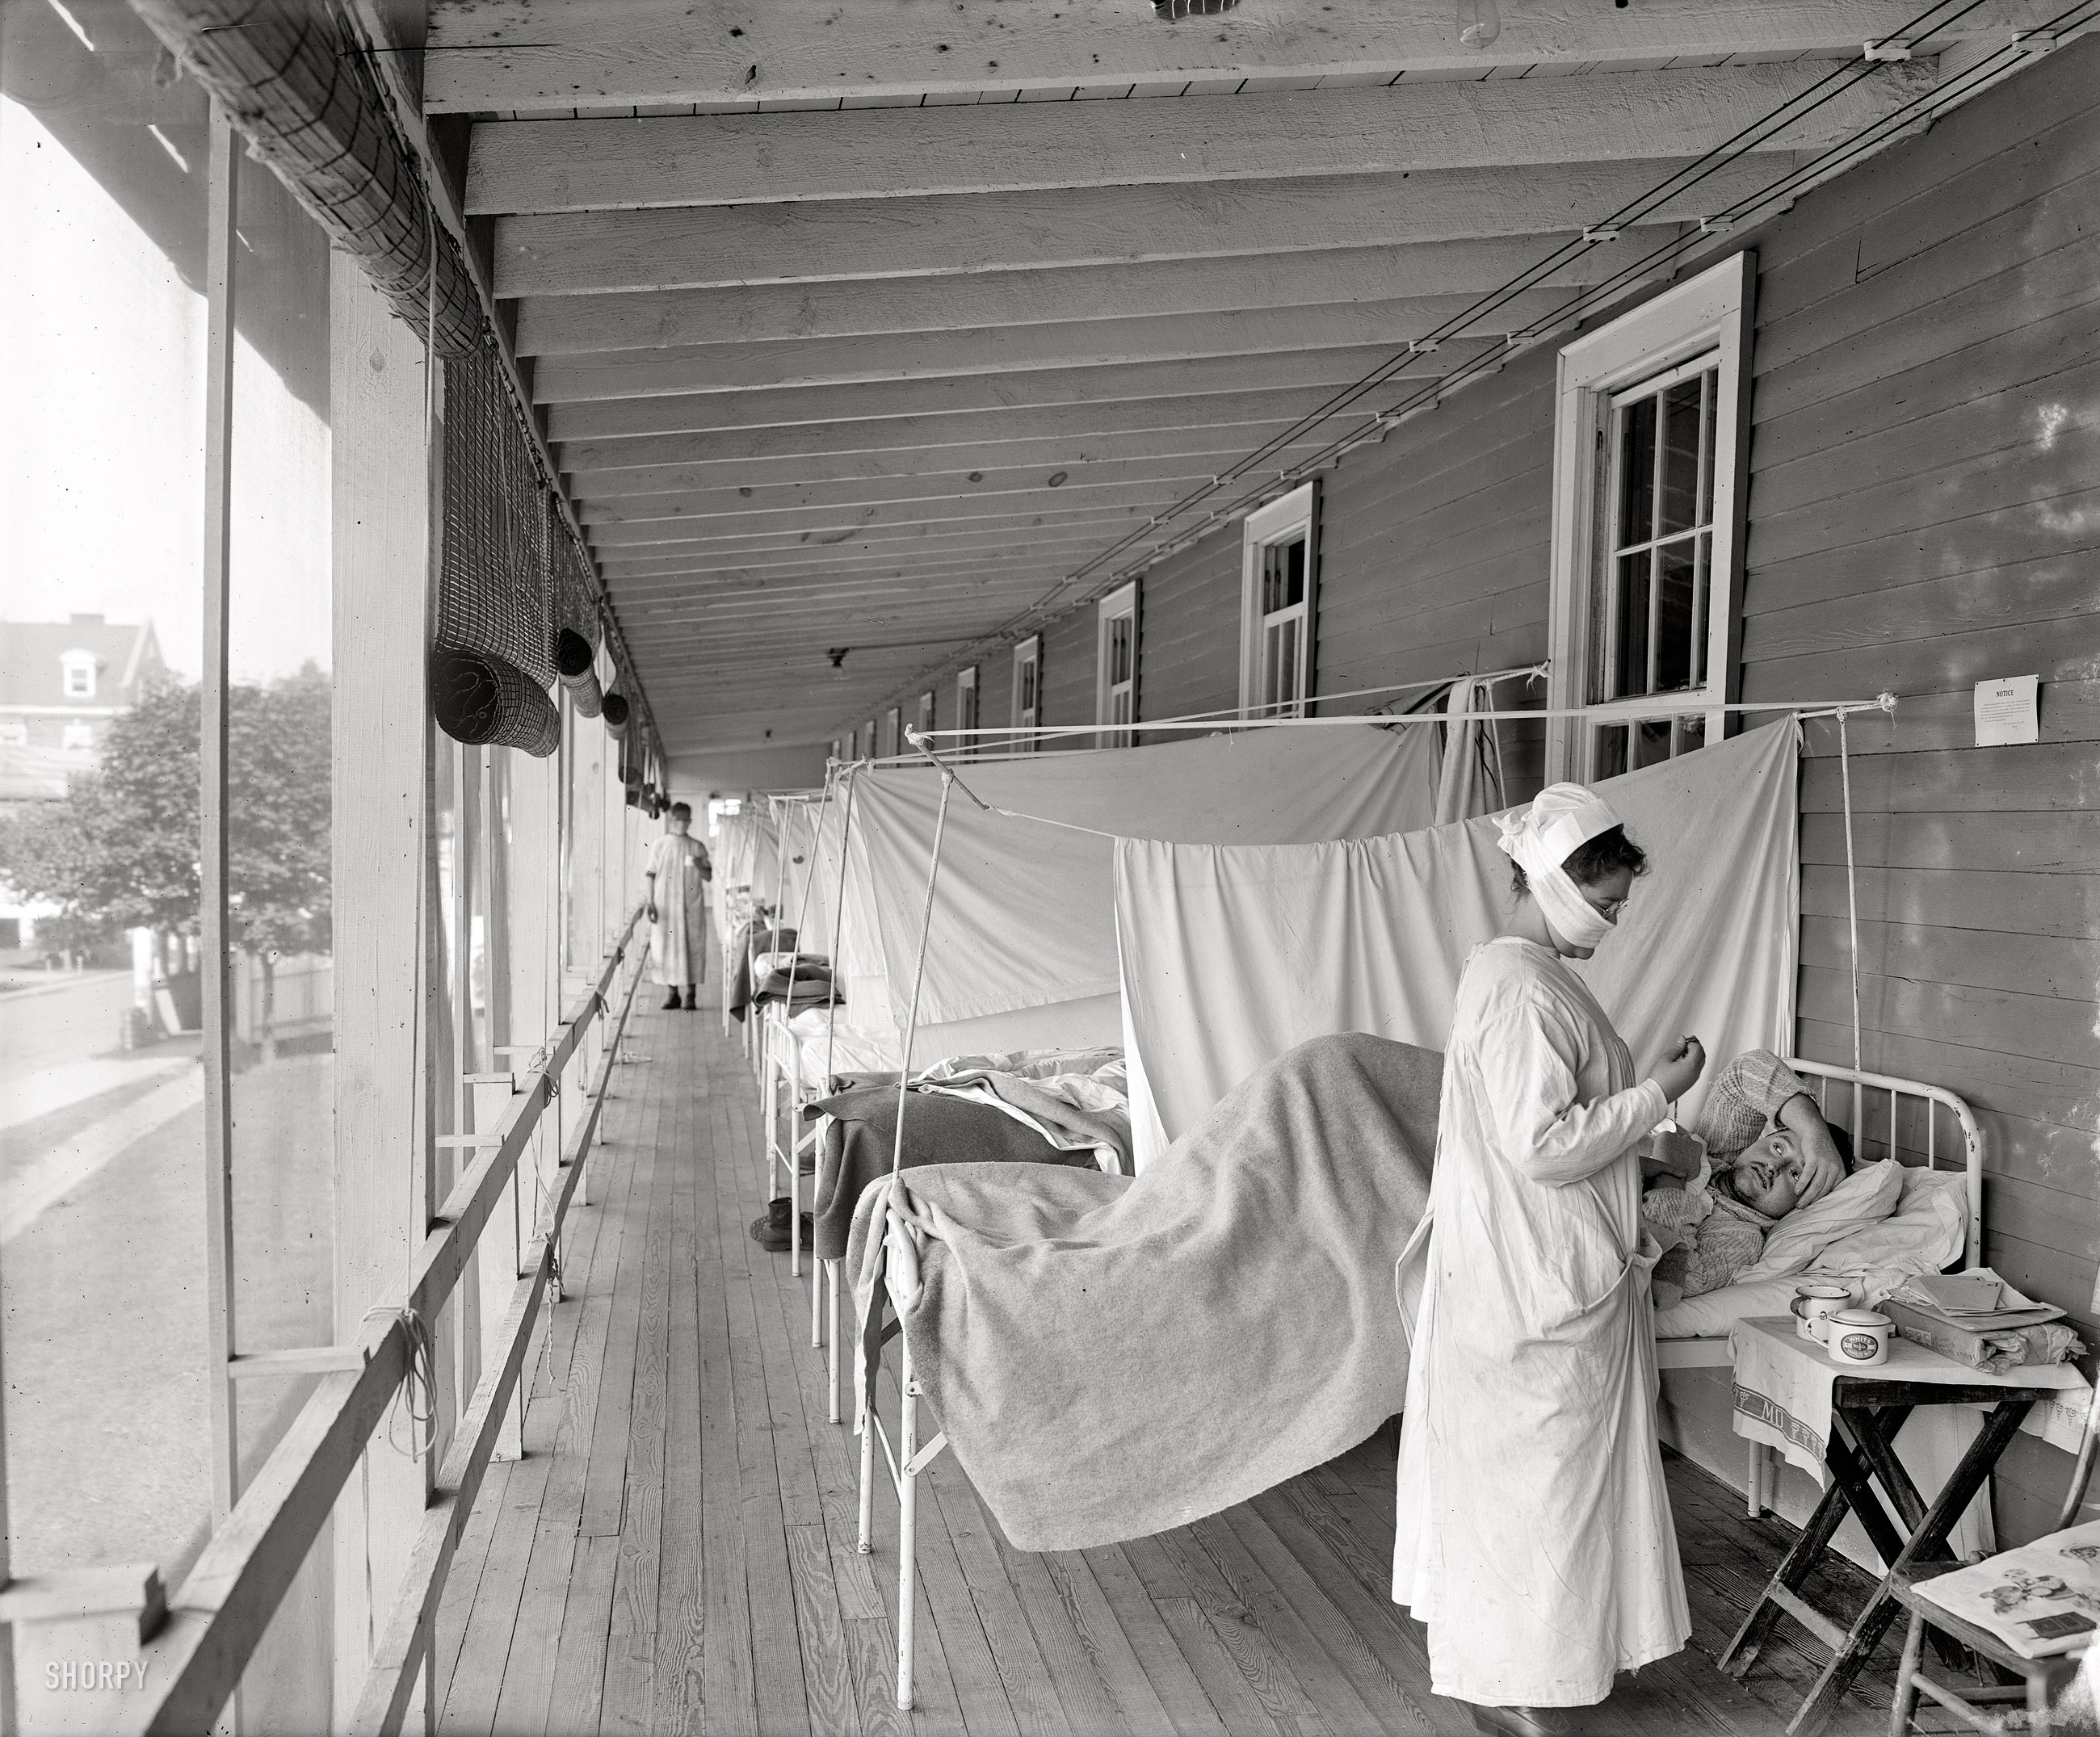 Washington, D.C., circa 1919. "Walter Reed Hospital flu ward." One of the very few images in Washington-area photo archives documenting the influenza contagion of 1918-1919, which killed over 500,000 Americans and tens of millions around the globe. Harris & Ewing glass negative. View full size.